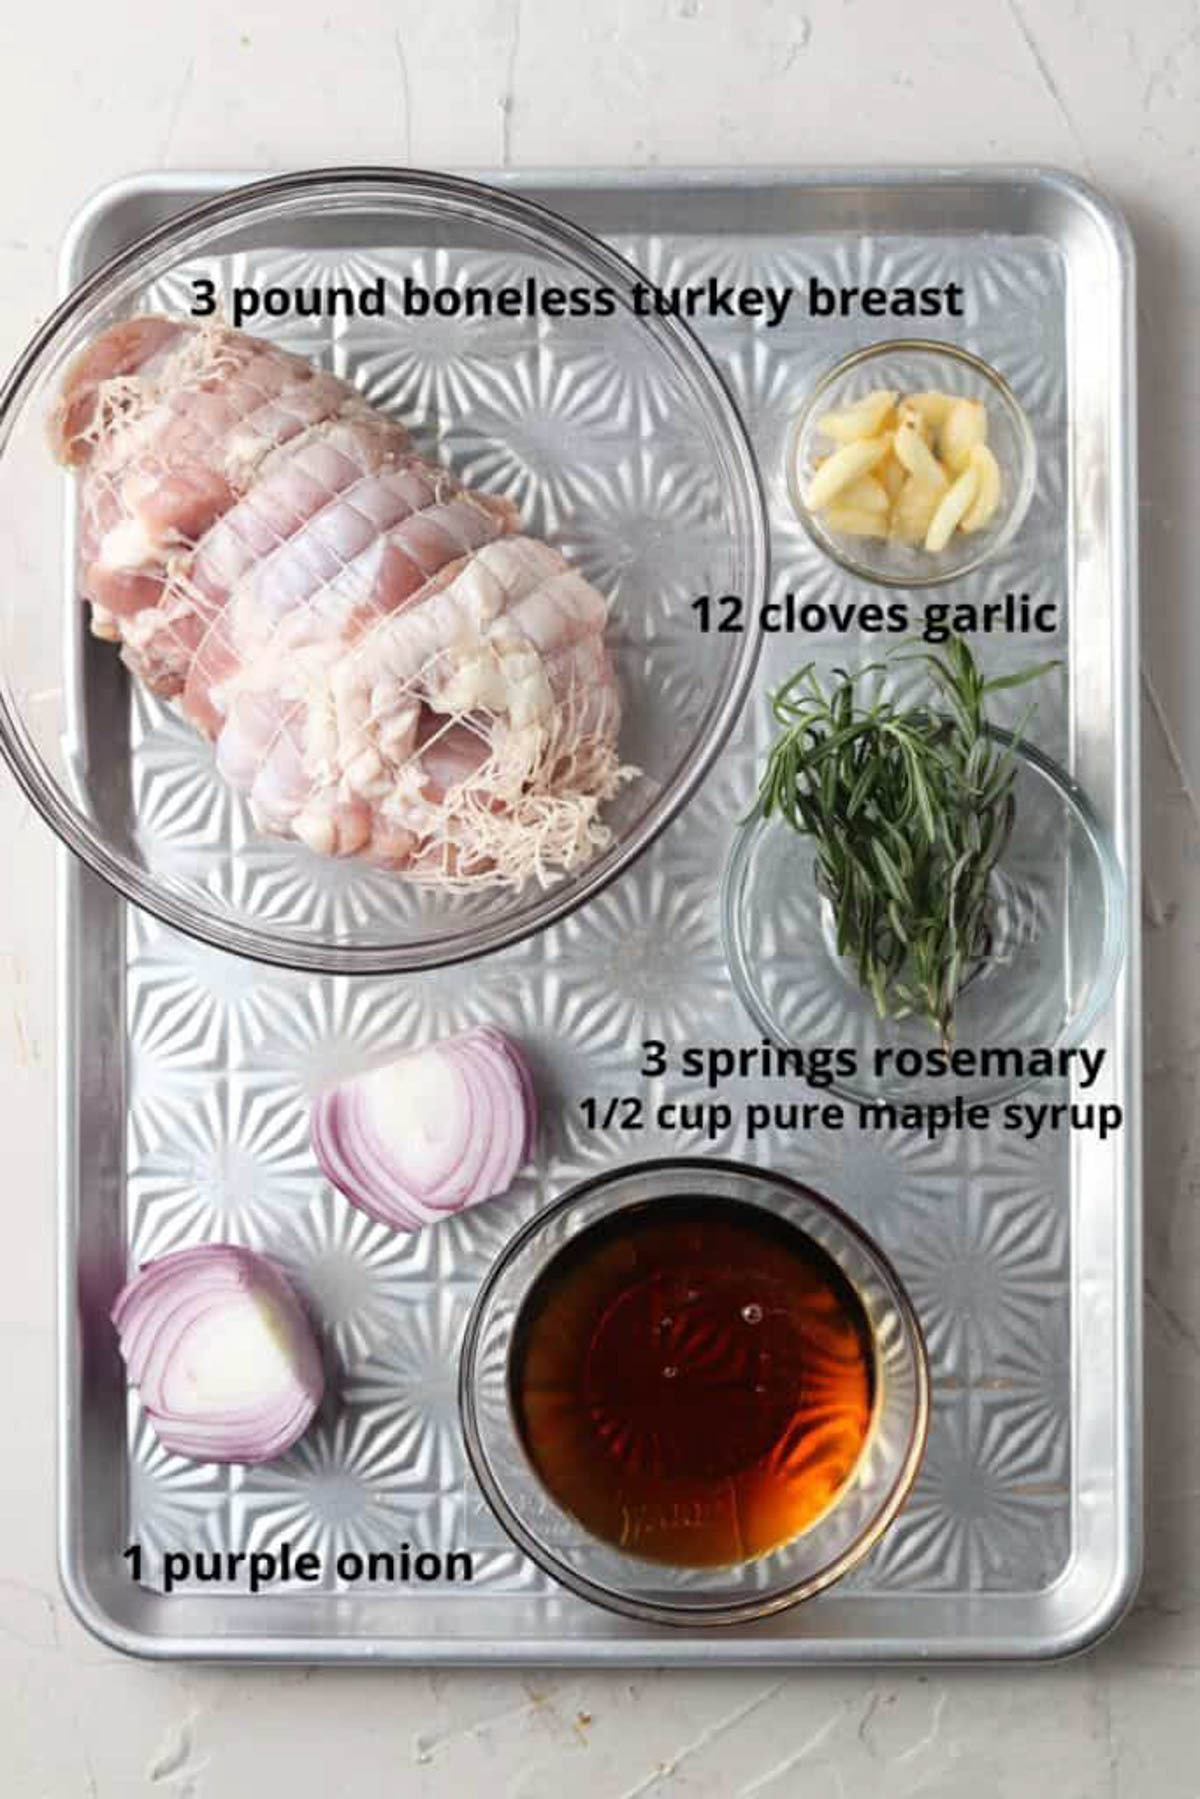 Boneless maple turkey breast recipe ingredients laid out in small glass bowls on a tray.